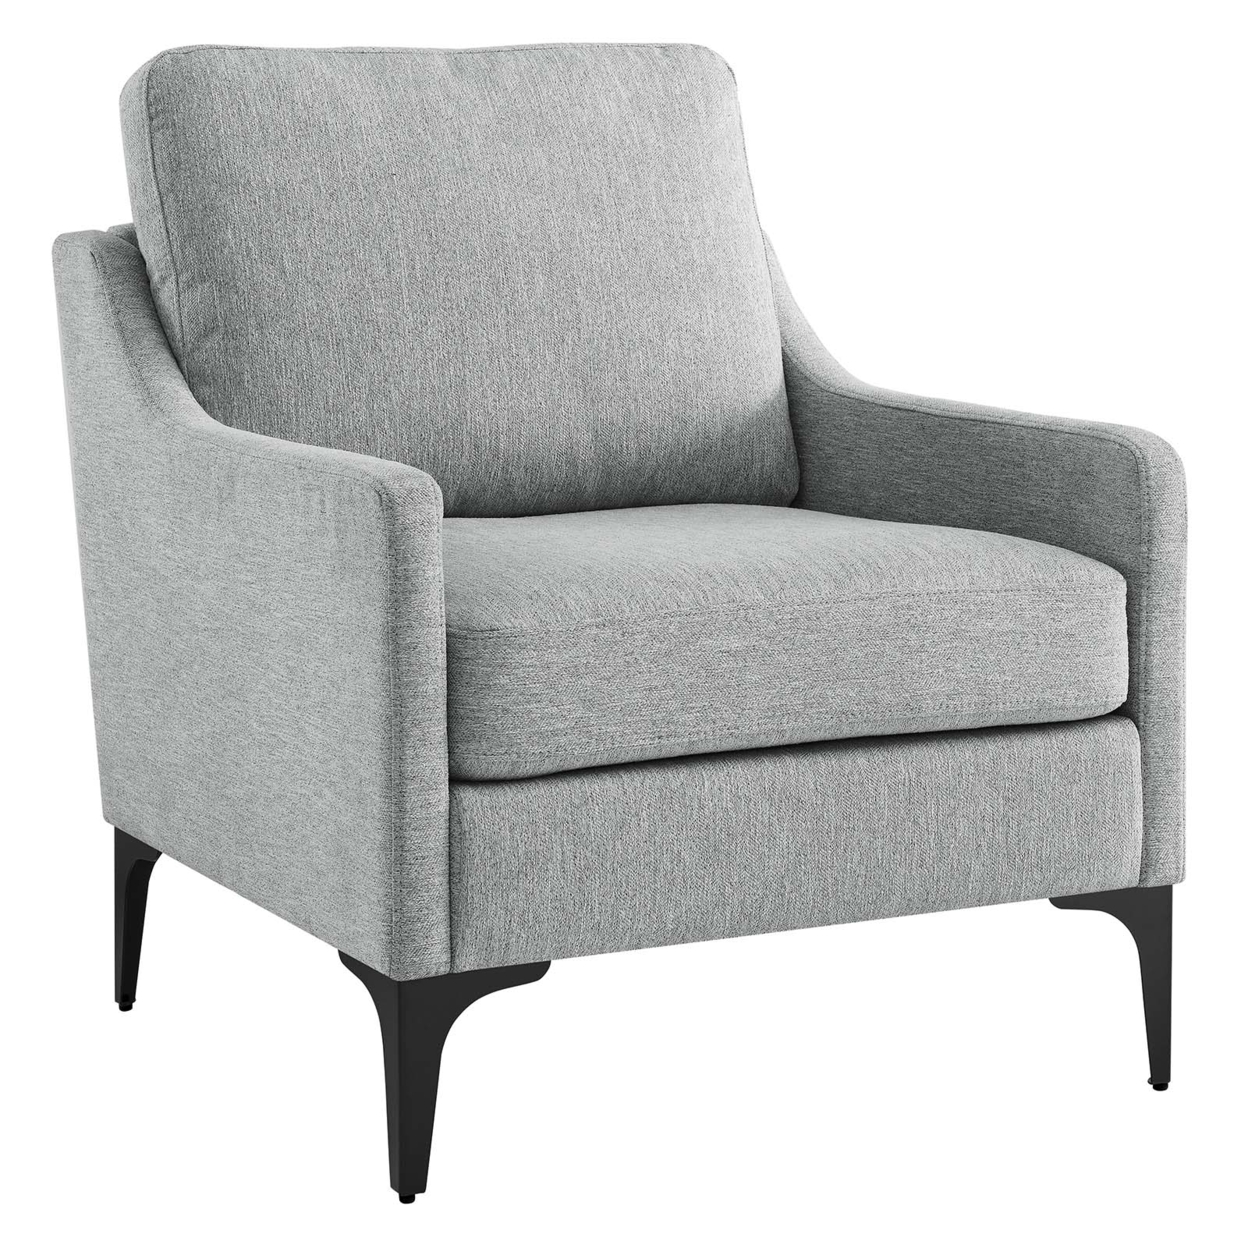 Corland Upholstered Fabric Armchair, Light Gray